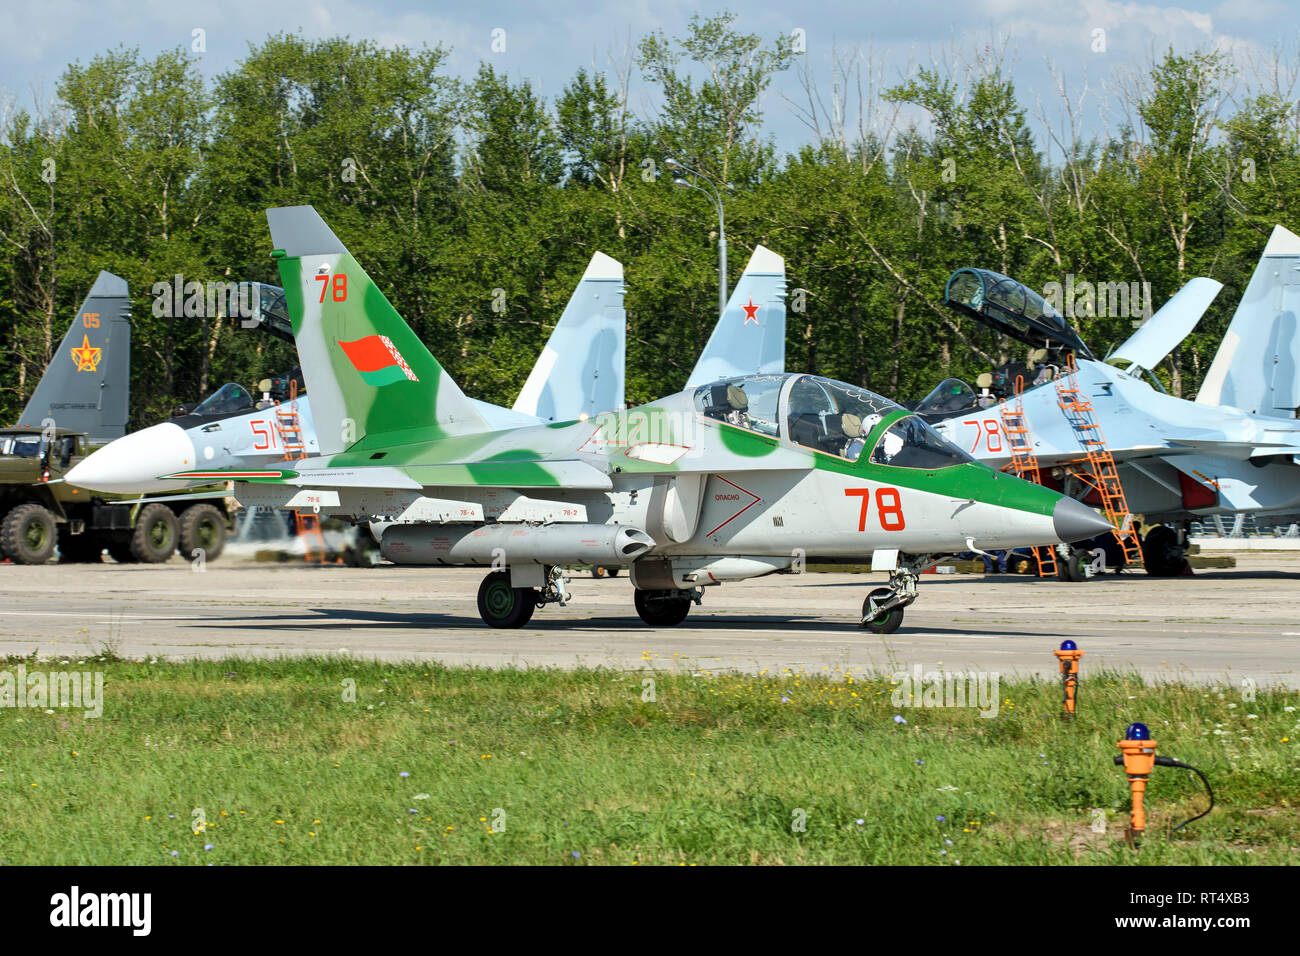 A Belarusian Air Force Yak-130 advanced trainer and light attack aircraft. Stock Photo